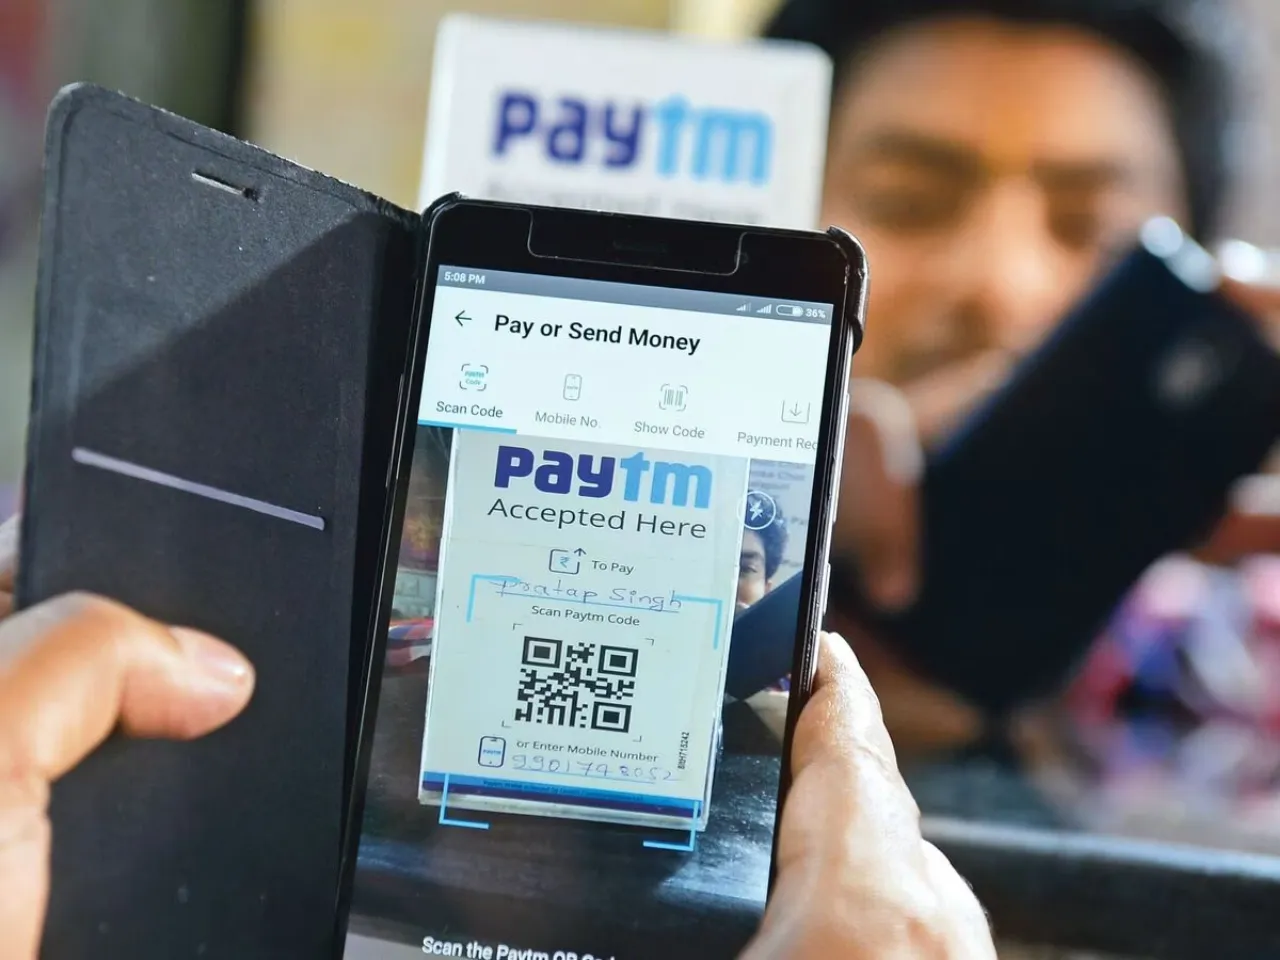 Paytm's Senior VP of business Praveen Sharma resigns; company issues clarification on layoffs